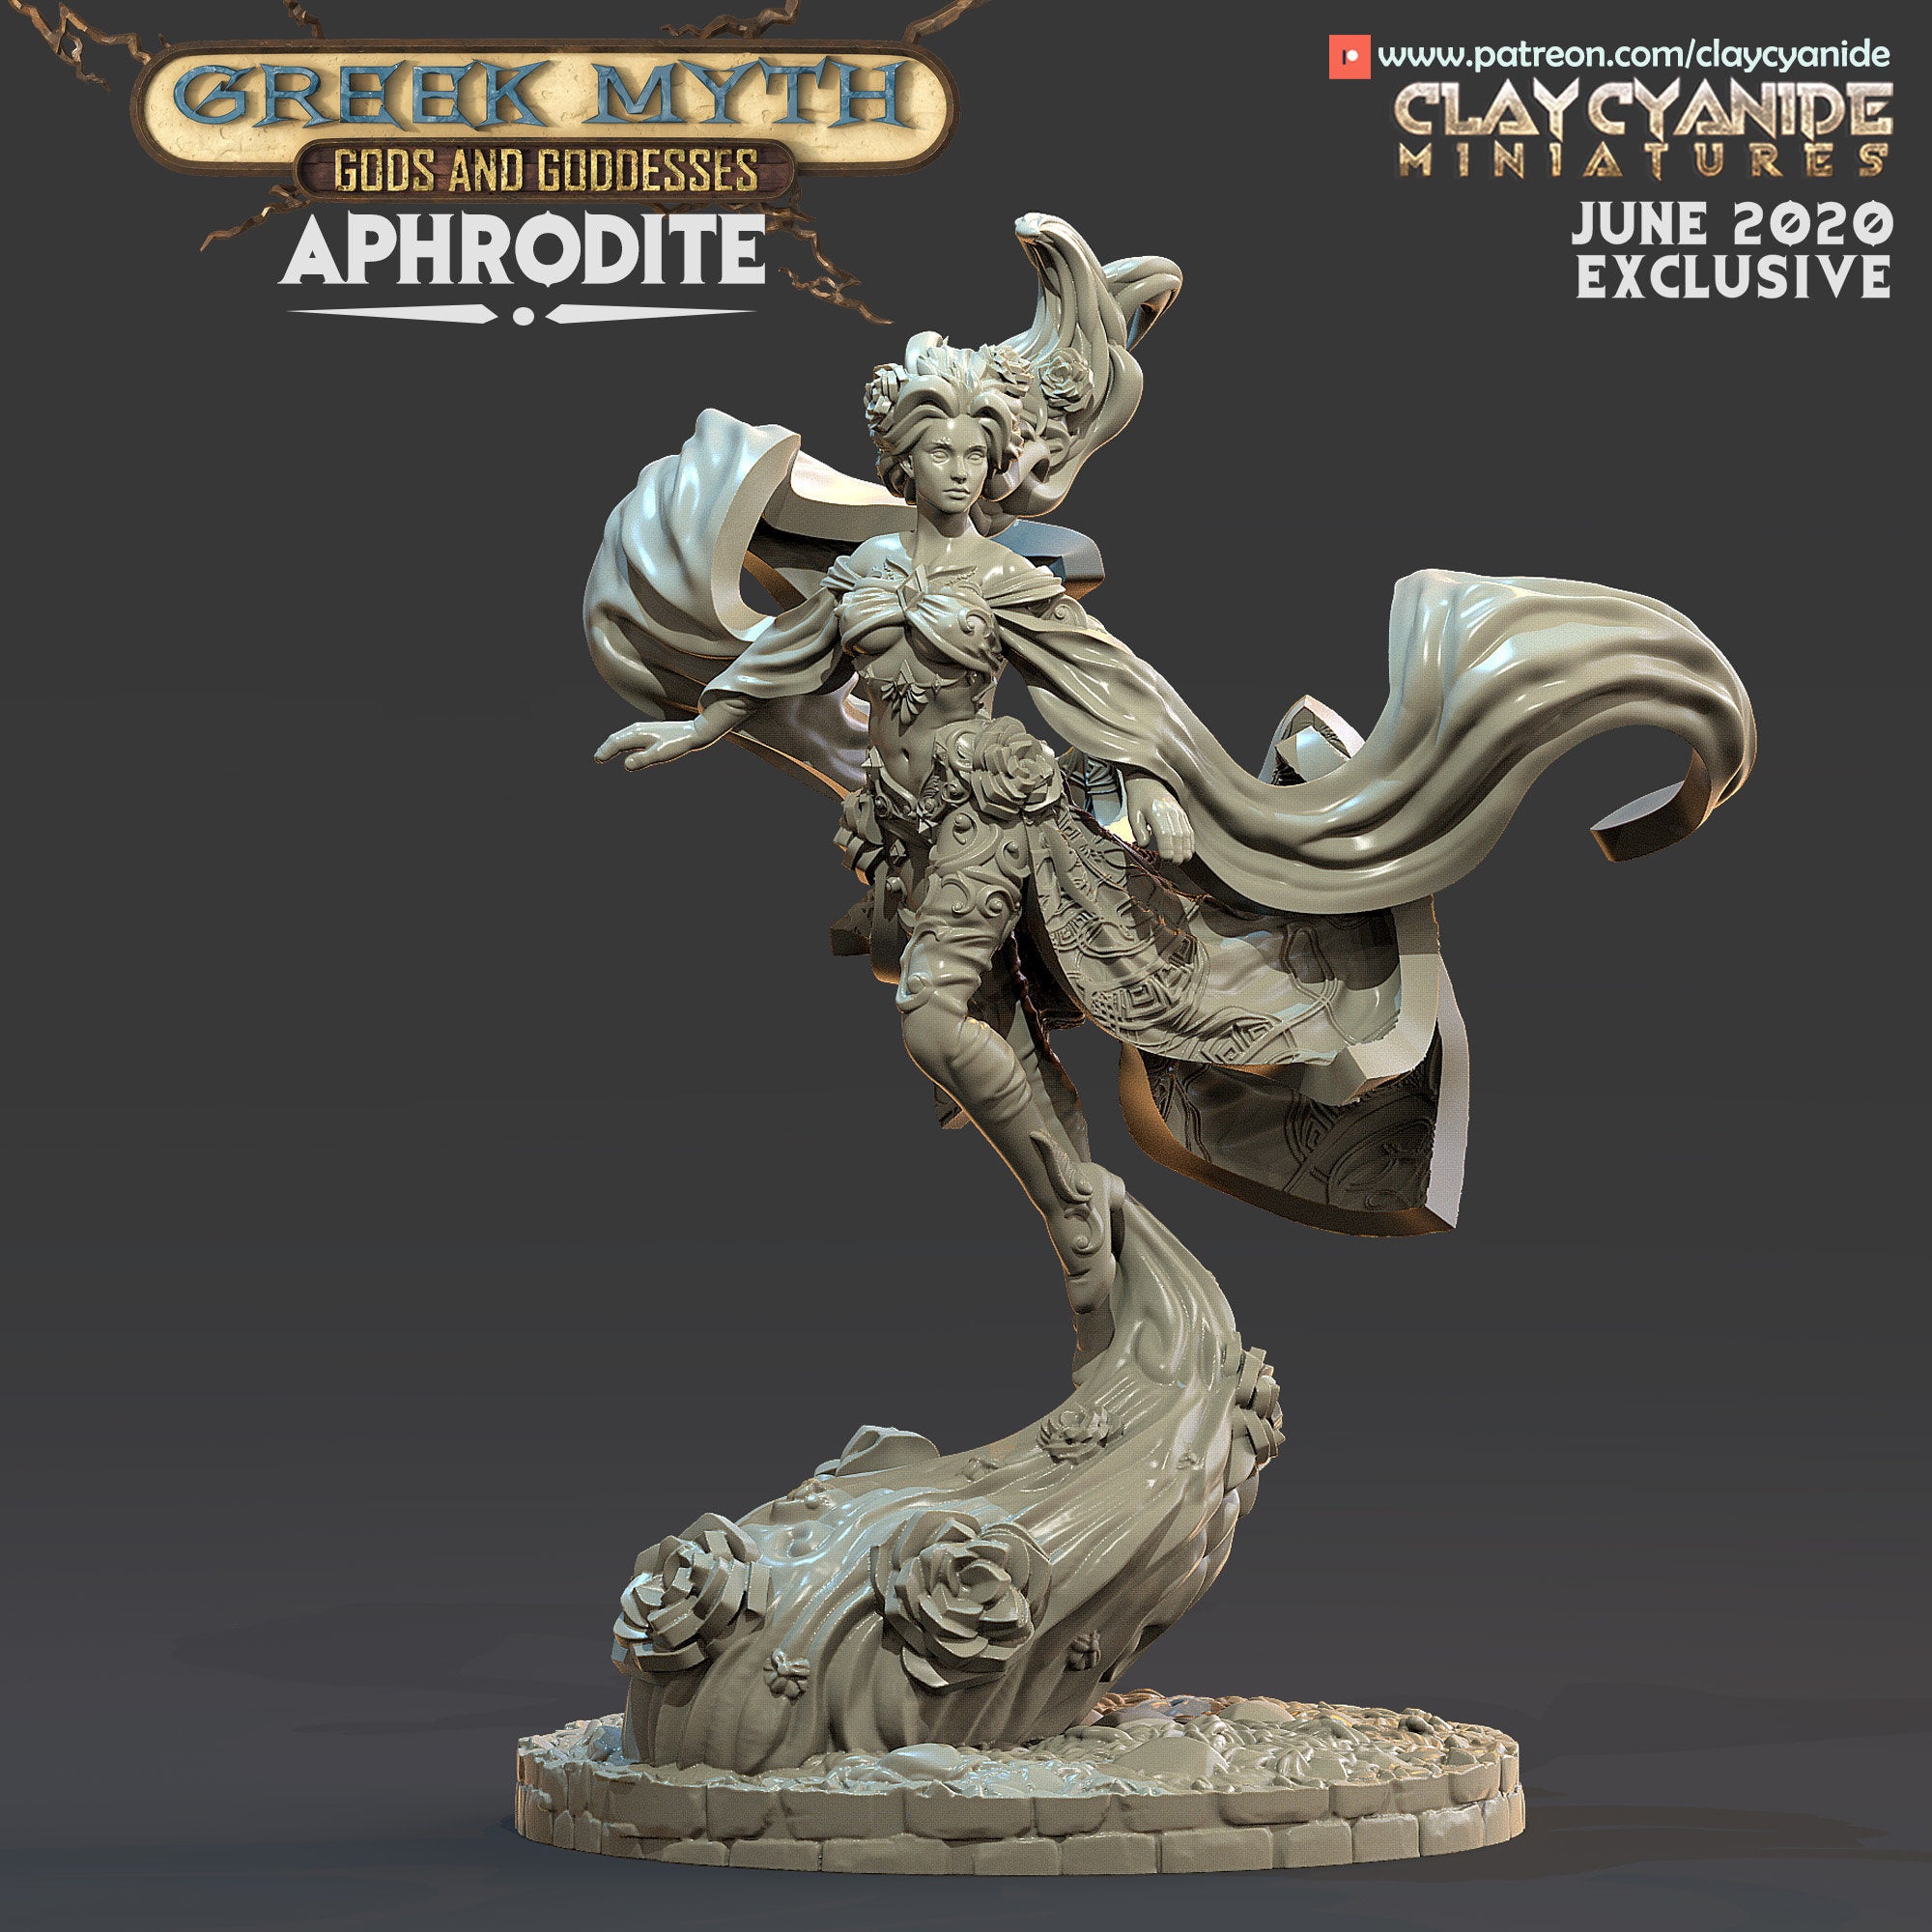 Aphrodite from Clay Cyanide Miniatures. This piece is very much a Premium Print!